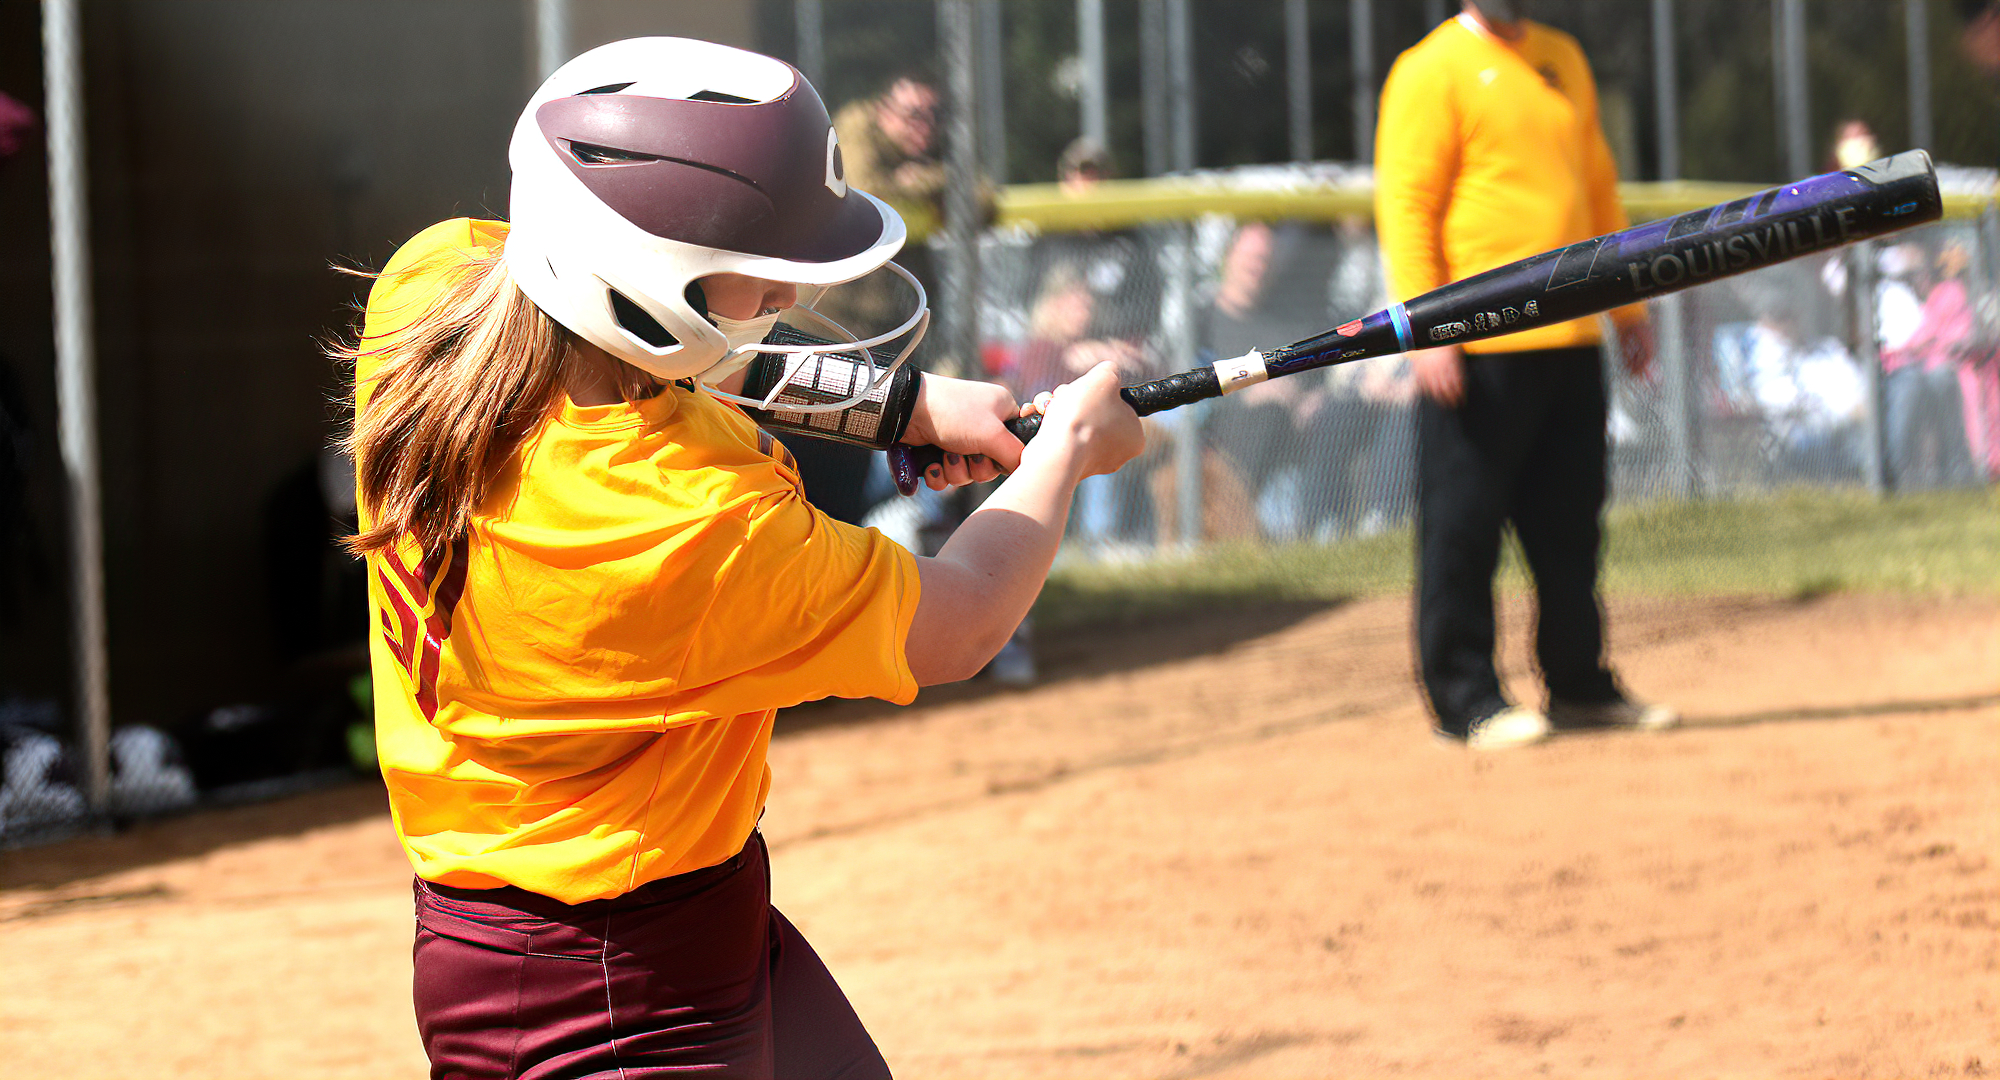 Junior catcher Ellie Tofteland led the Cobbers on opening day as she went 3-for-4 with a home run, 3 RBI and 2 runs scored in the team's two games.